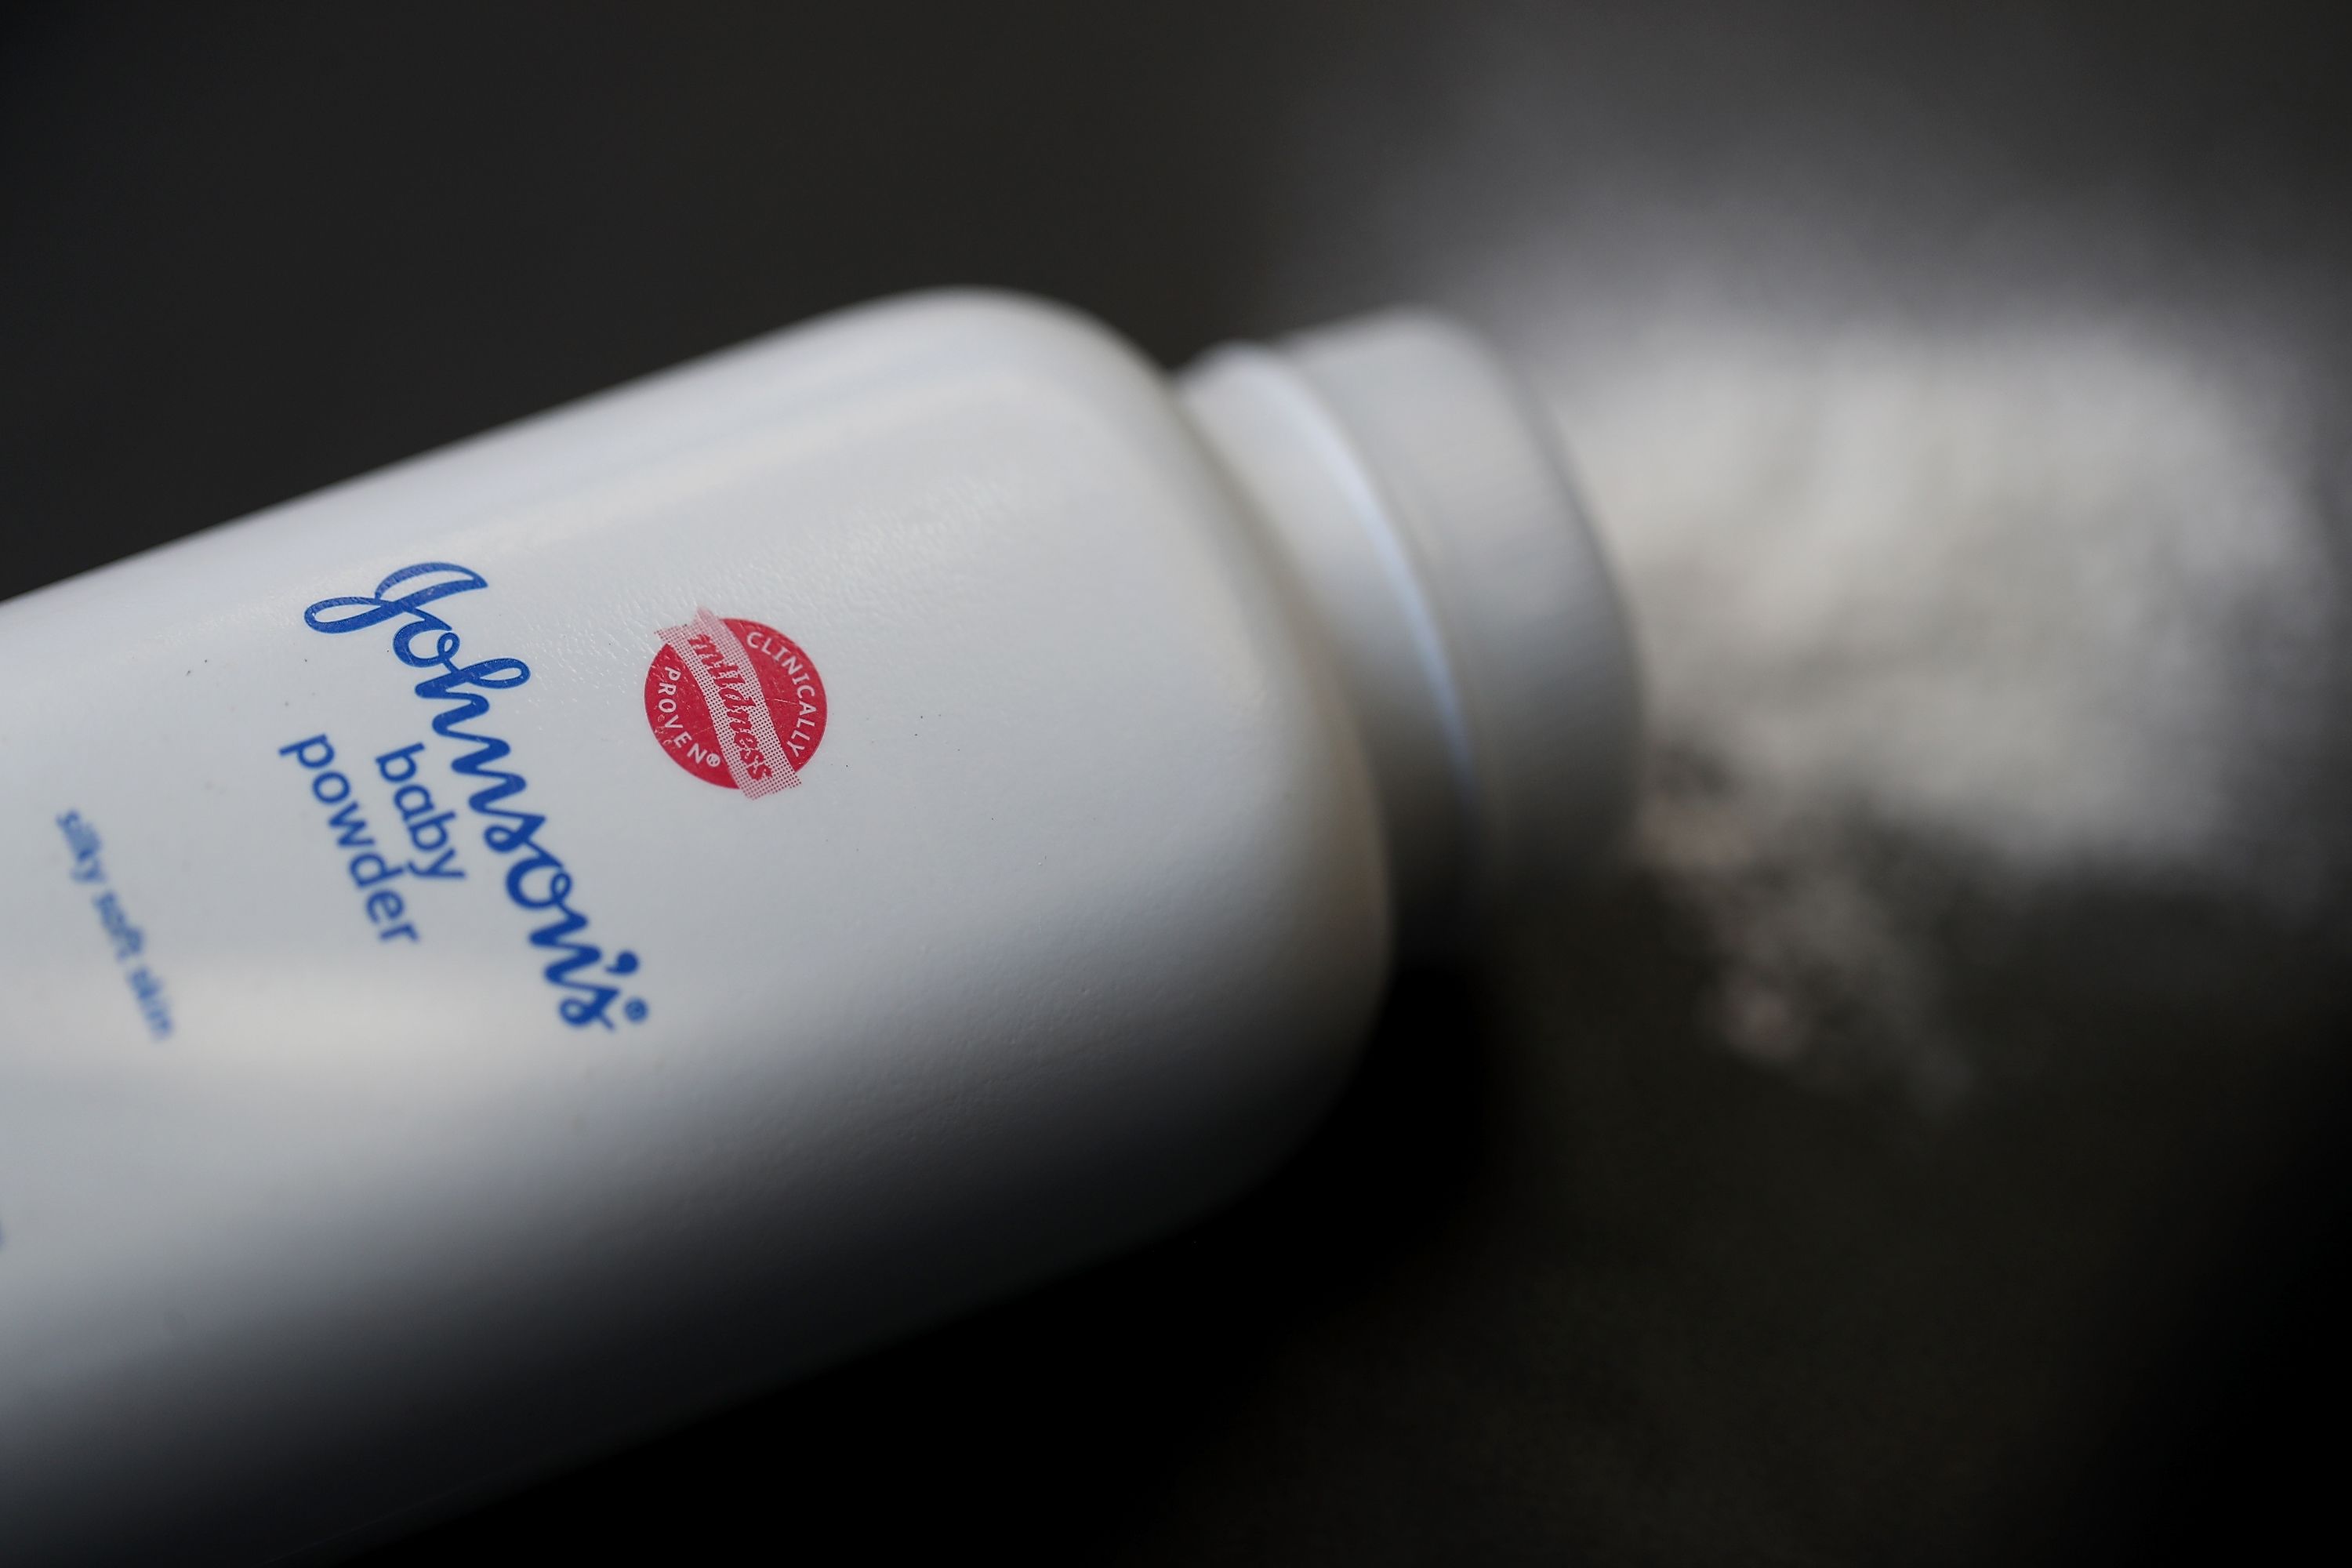 Jury finds J&J baby powder did not cause mesothelioma: Company